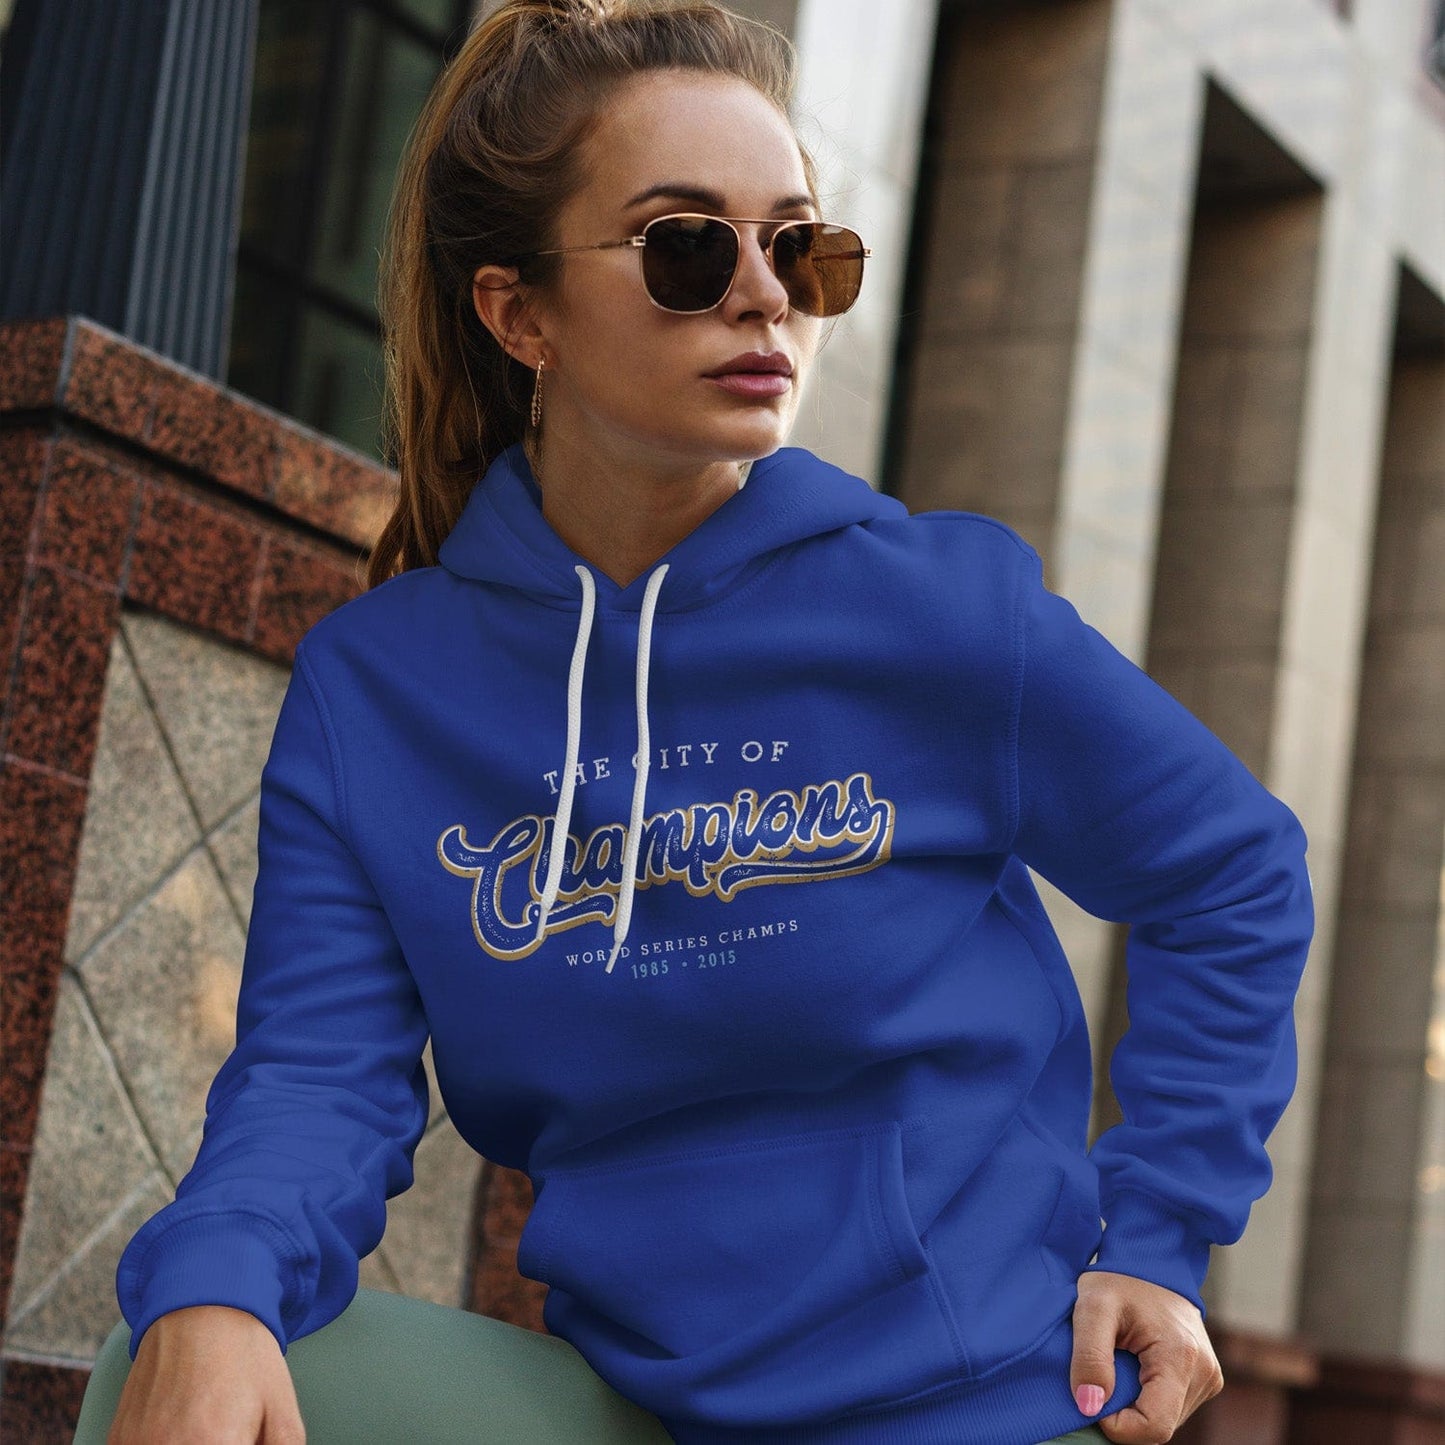 KC Swag Kansas City Royals white/gold CITY OF CHAMPIONS on royal blue pull-over hoodie worn by female model sitting on steps in front of downtown building